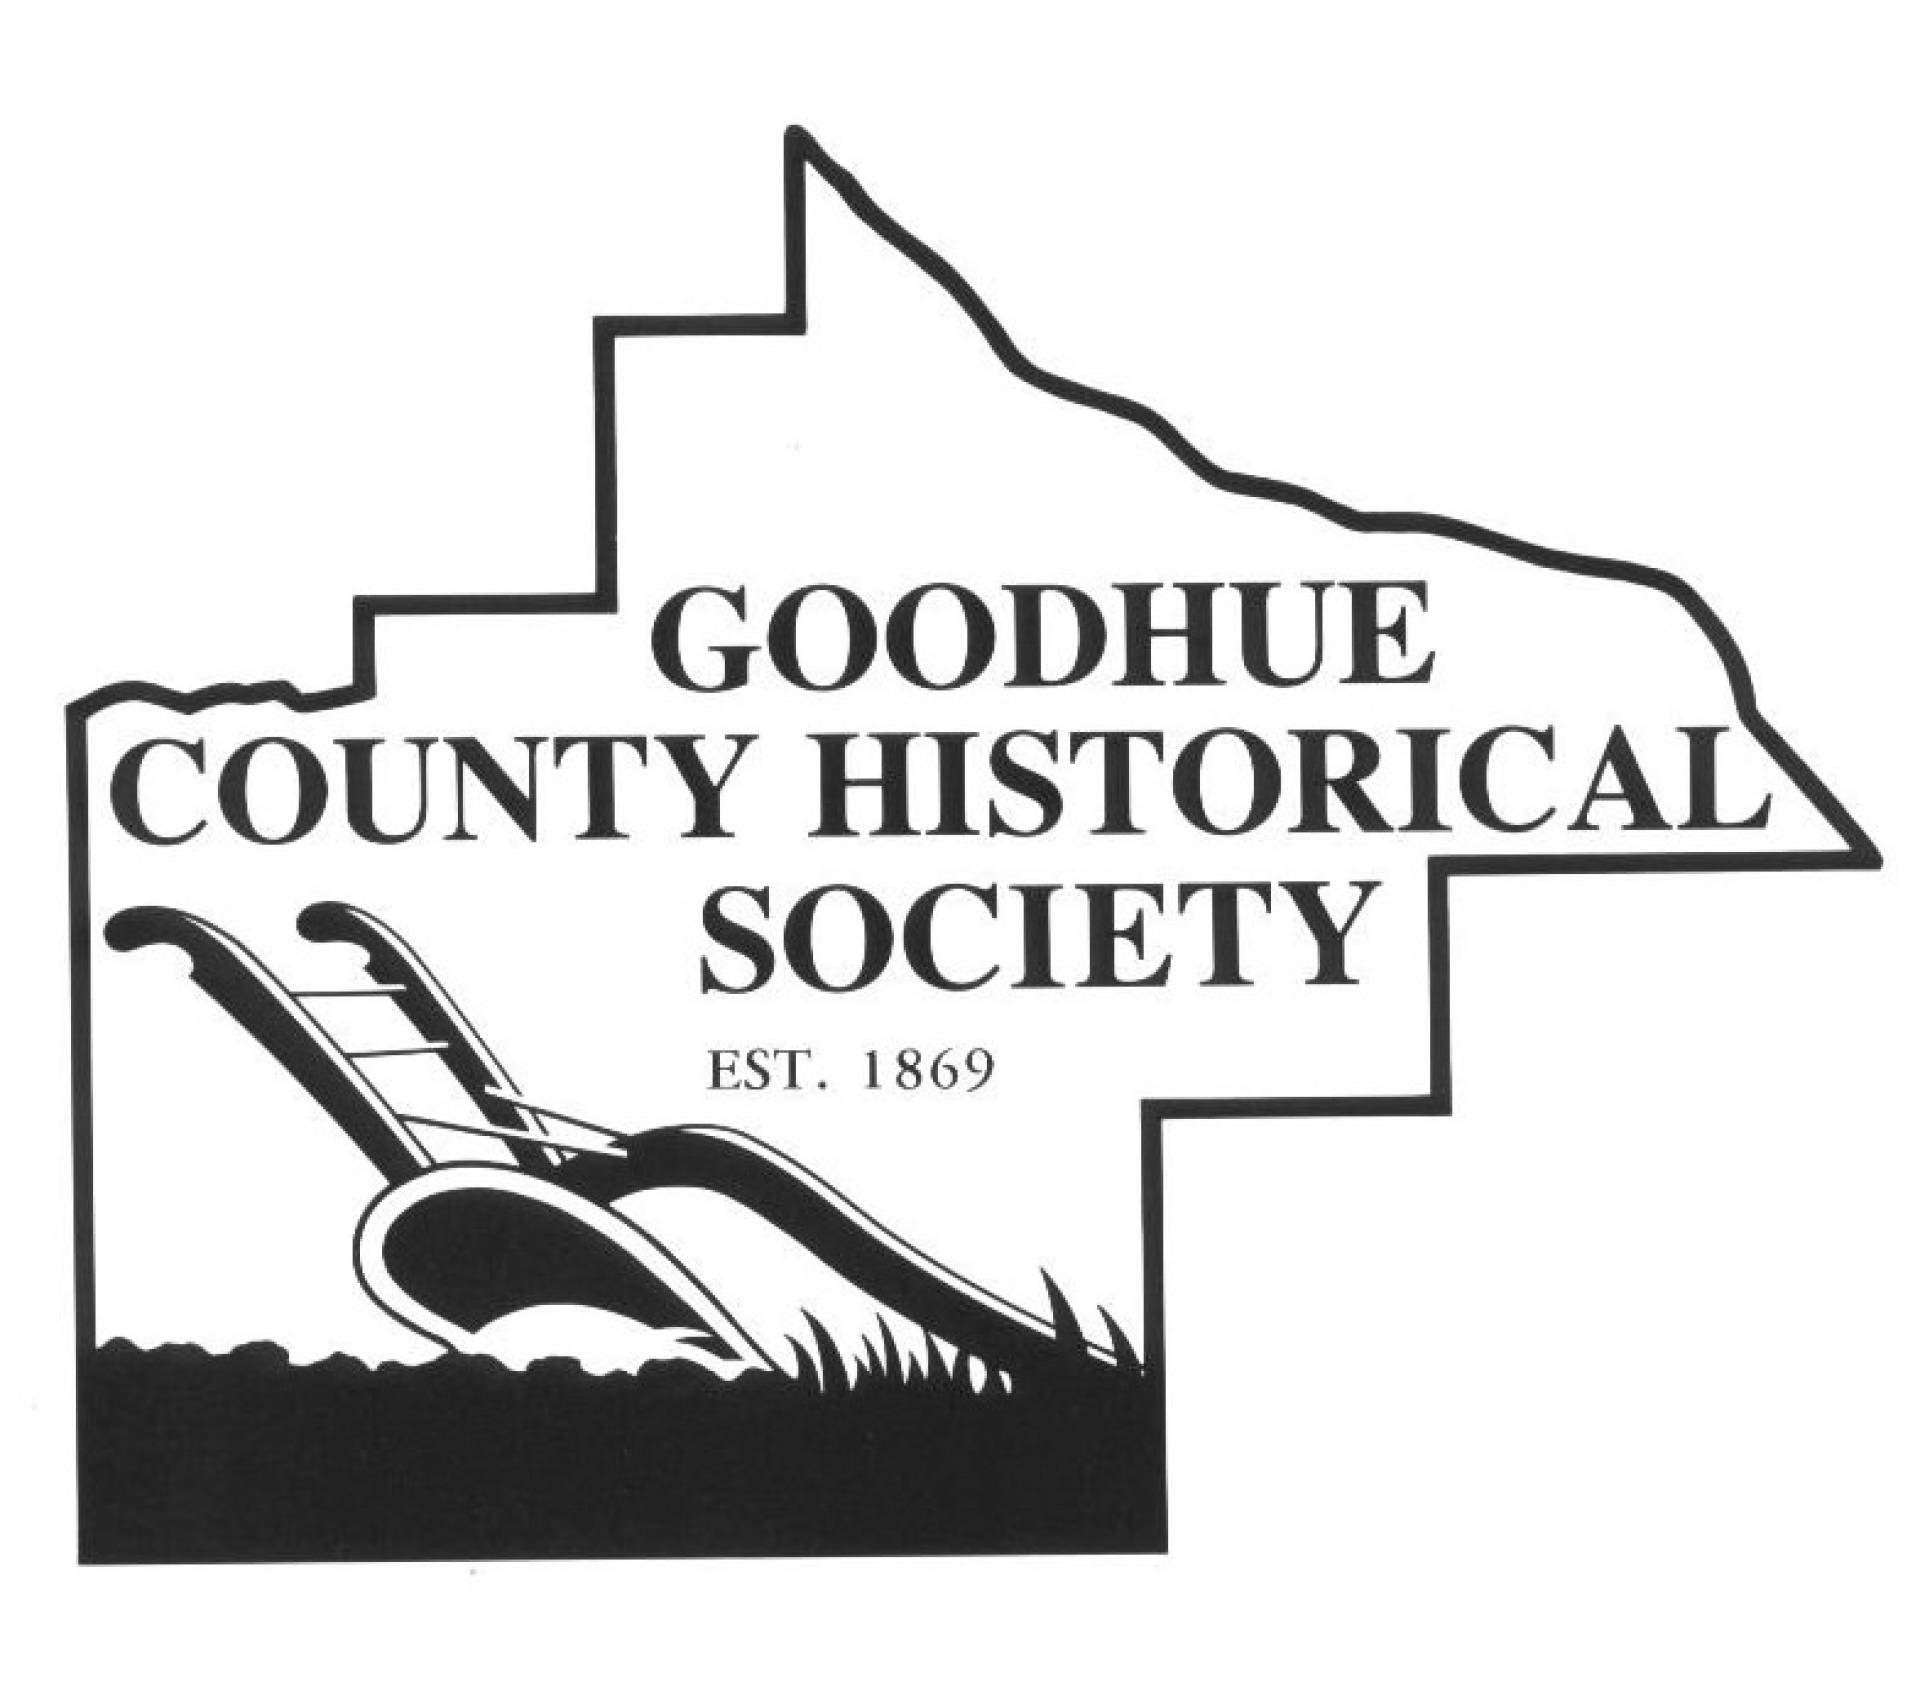 Goodhue County Historical Society Est. 1869